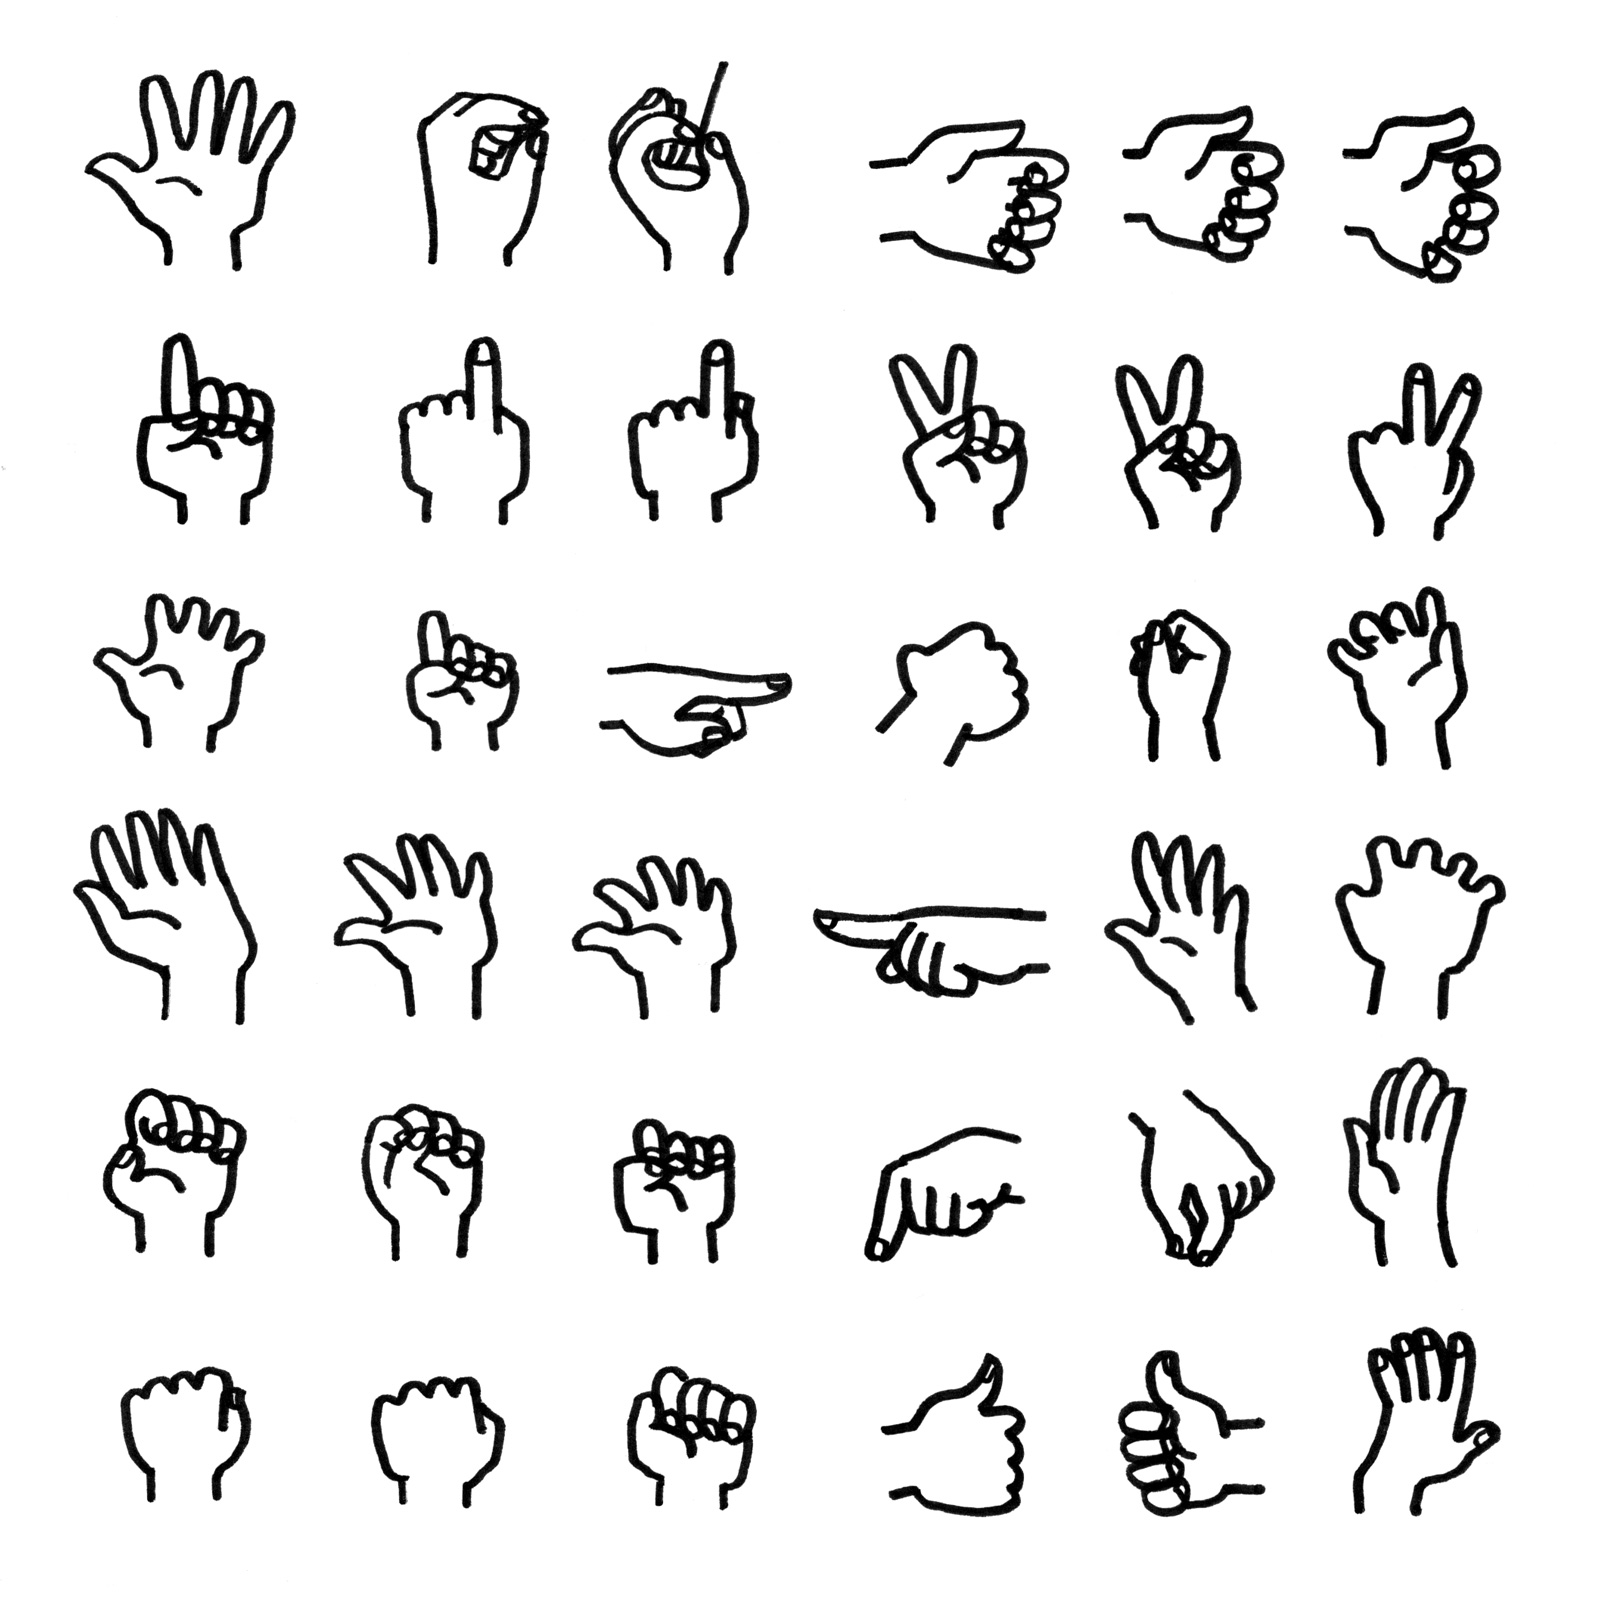 A six by six grid of lumpy hand doodles in various poses, some lumpier than others....